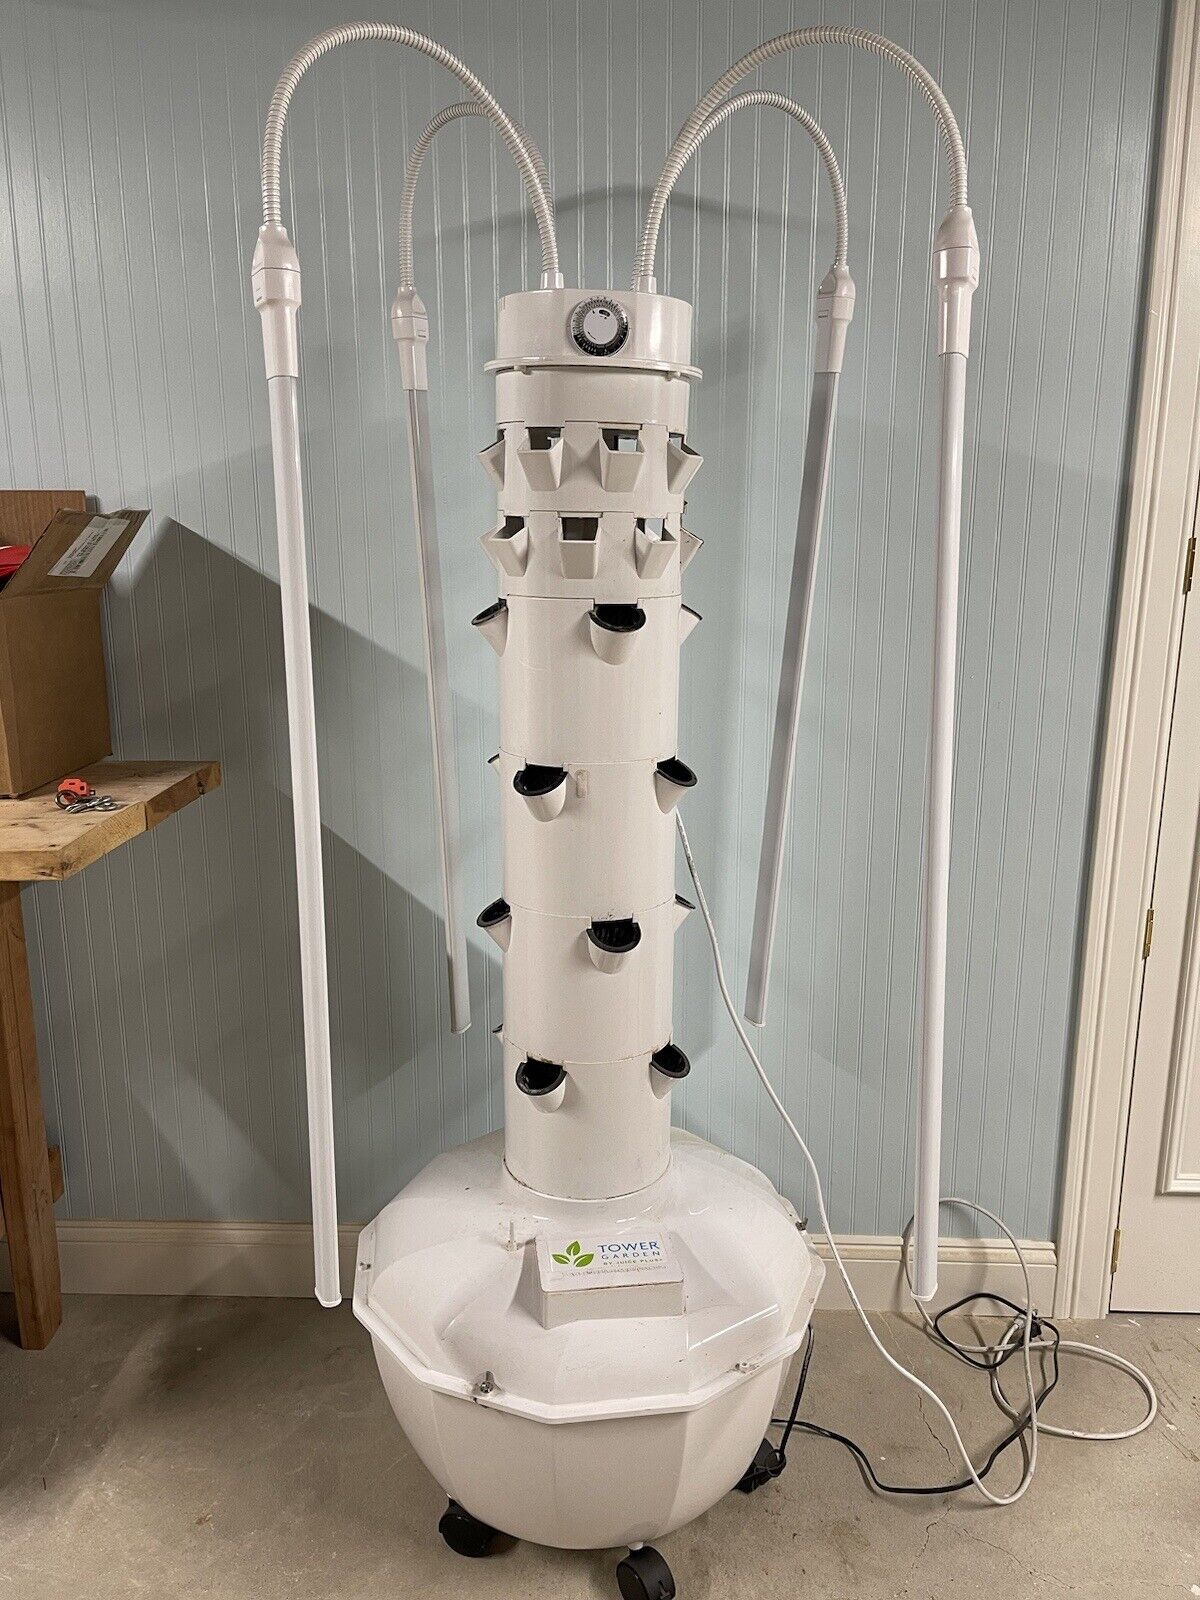 Tower garden HOME By juice plus